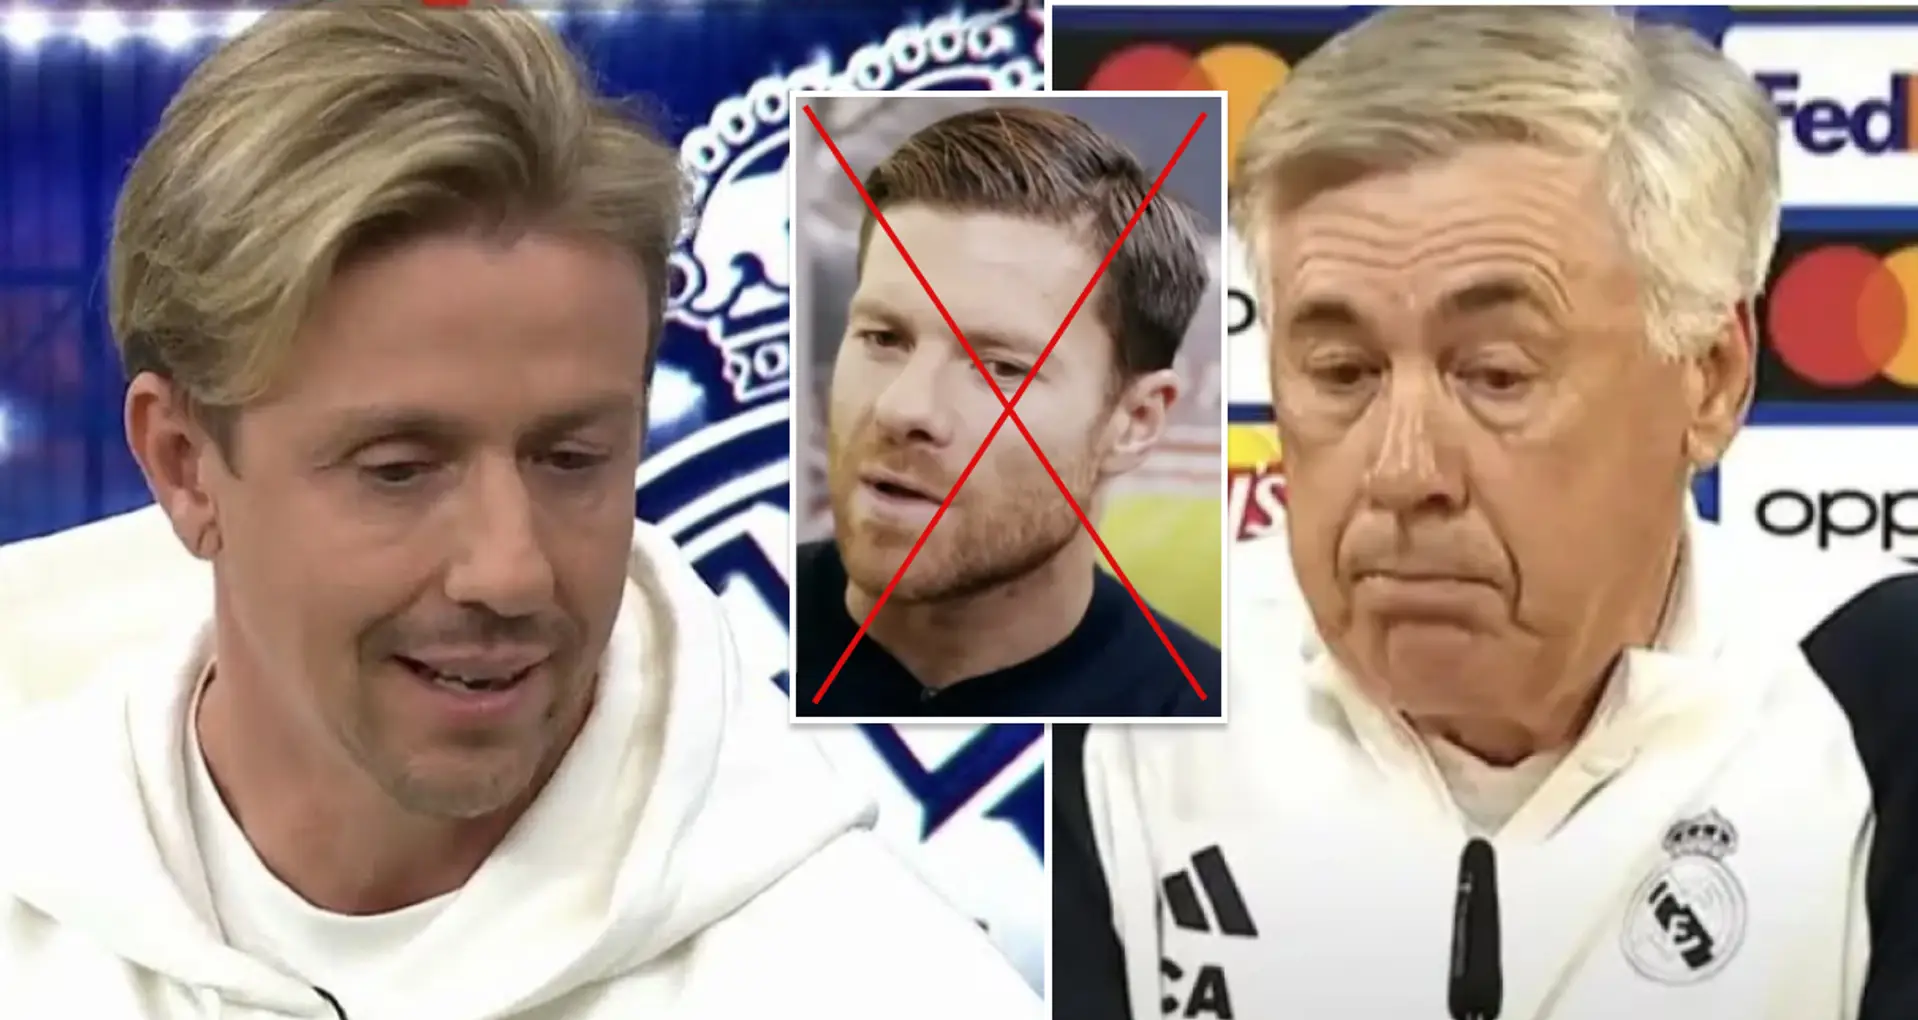 Guti picks 'perfect' coach for Real Madrid to succeed Ancelotti - not Xabi Alonso